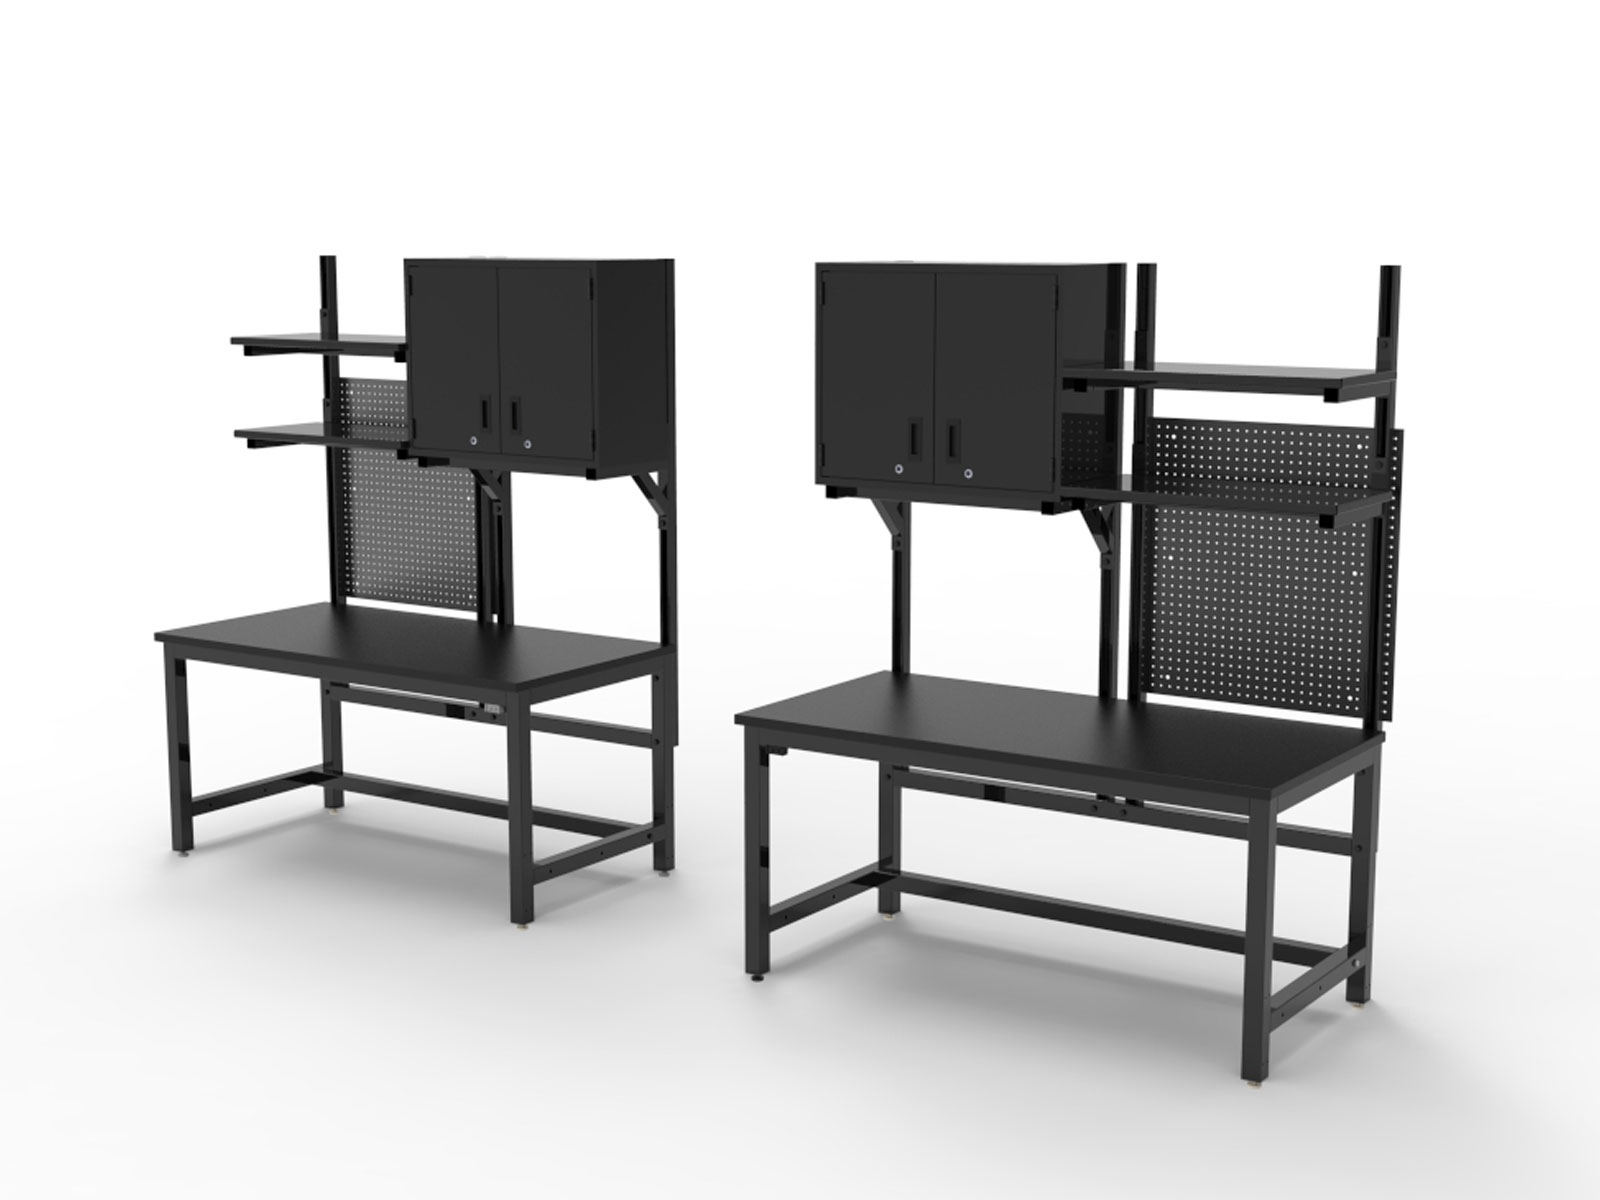 side by side black esd workbenches